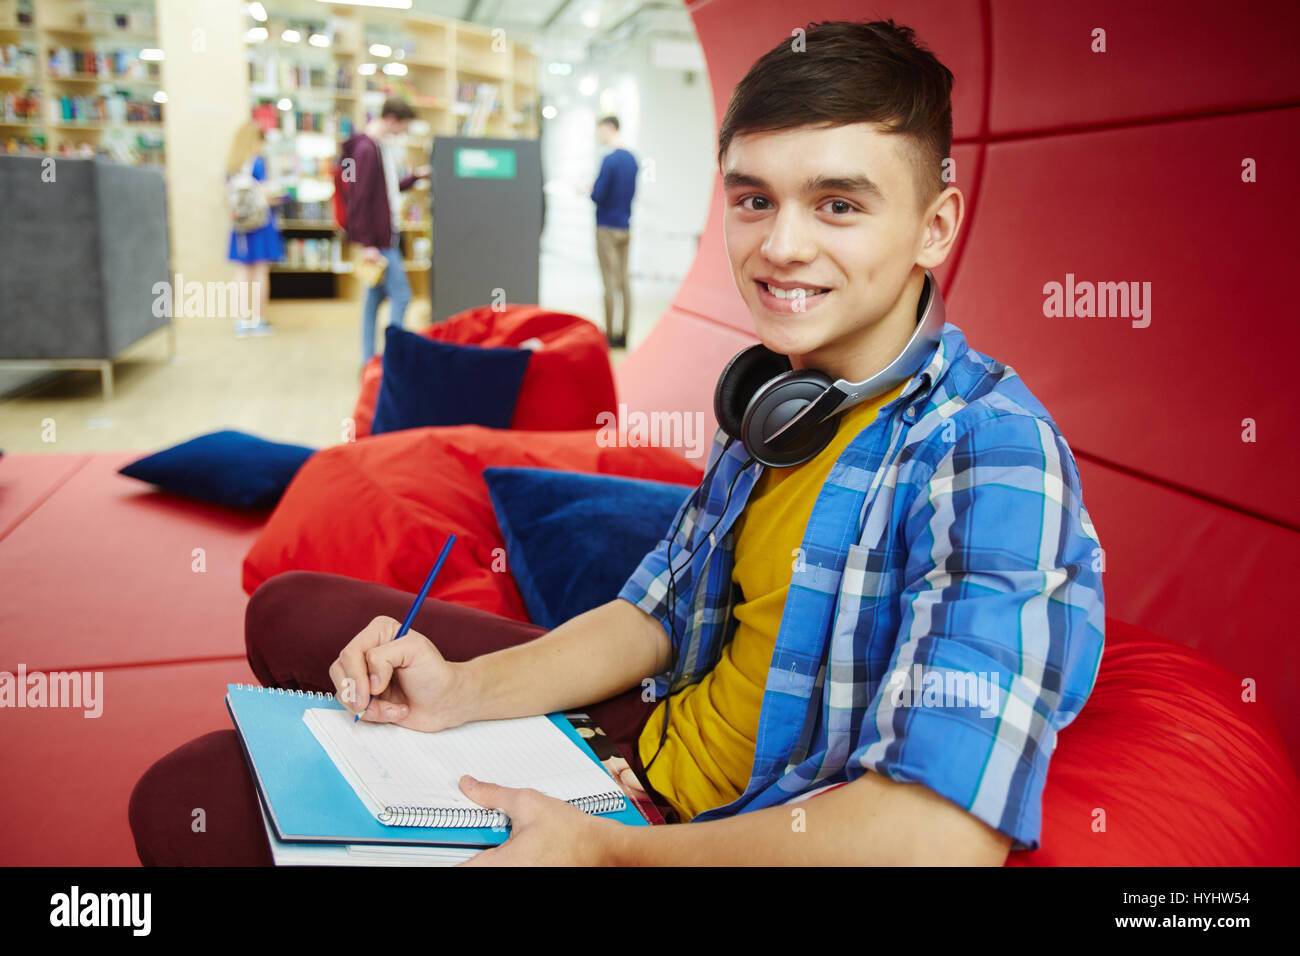 Smiling College Student in Modern Workspace Stock Photo